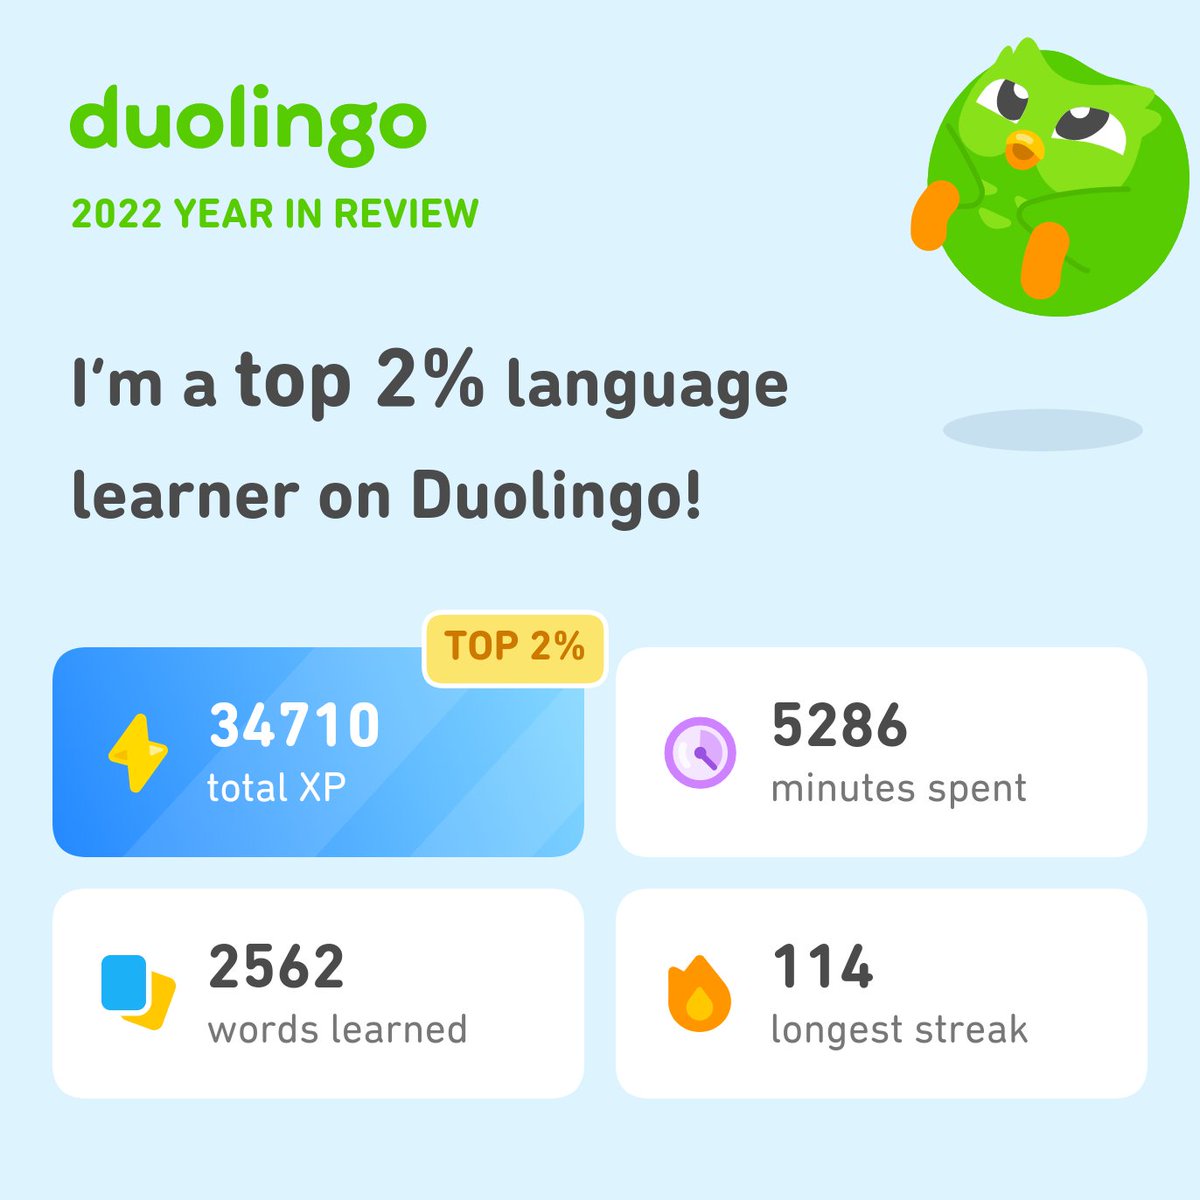 Look how much I learned on Duolingo in 2022! How did you do? #Duolingo365